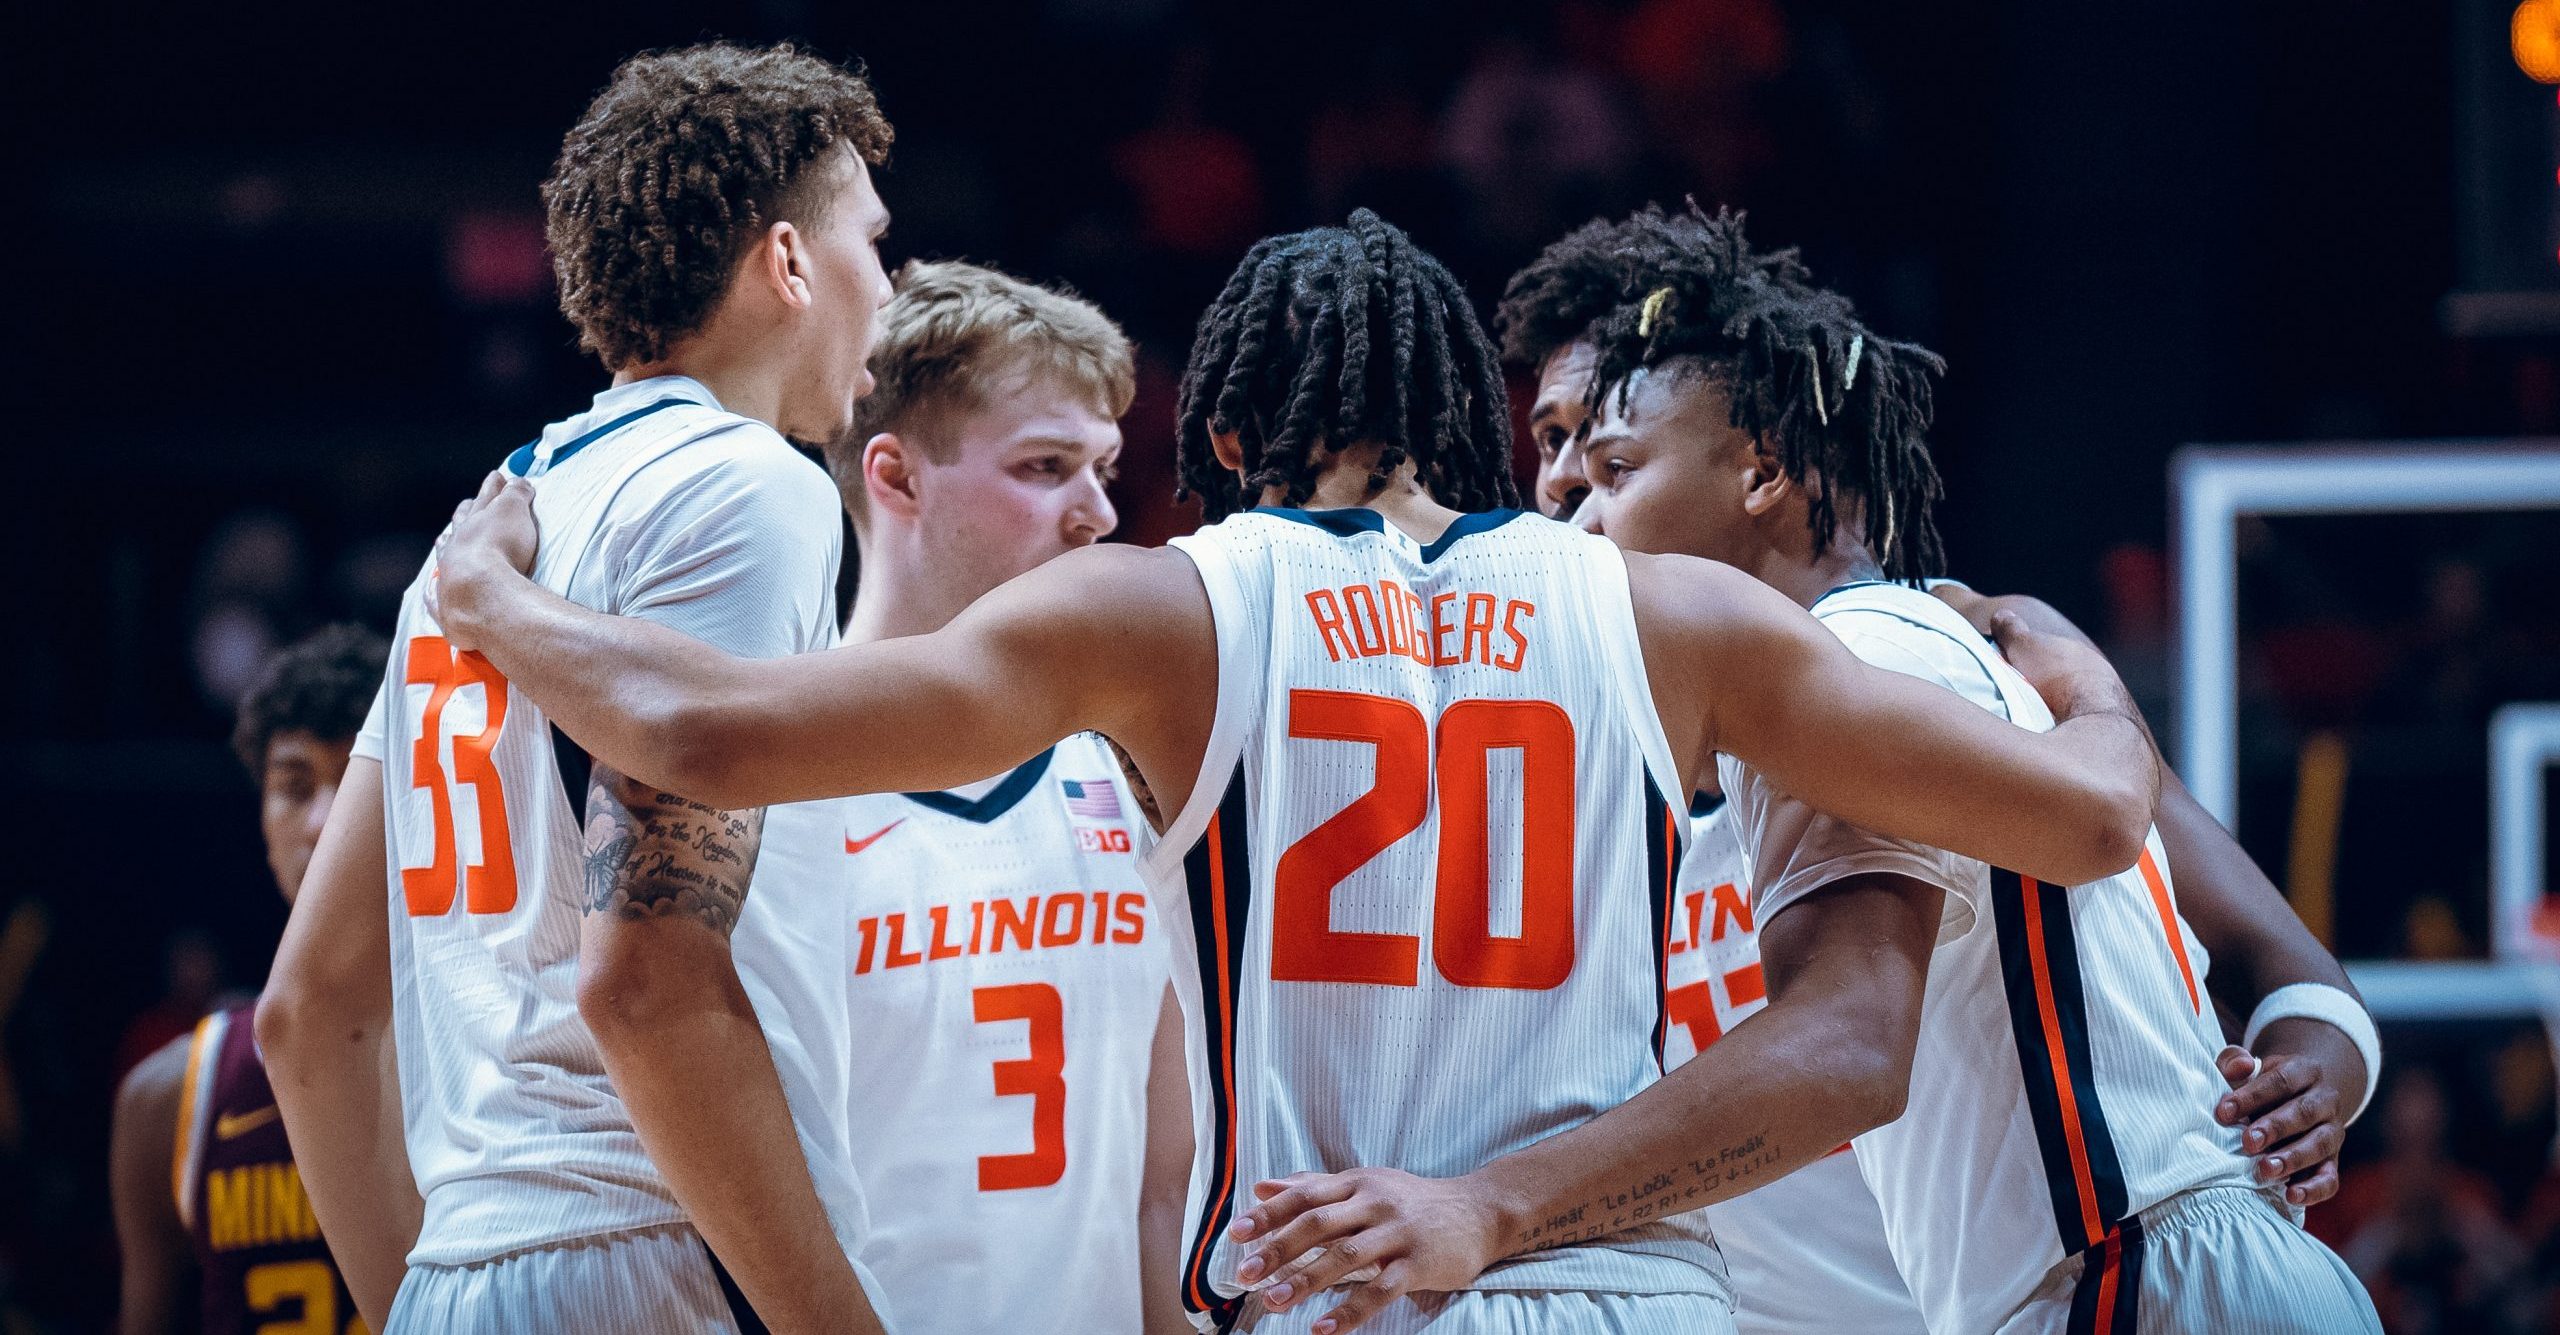 “It's a long game” - Why Early Deficits Aren’t Necessarily A Big Problem For Illinois